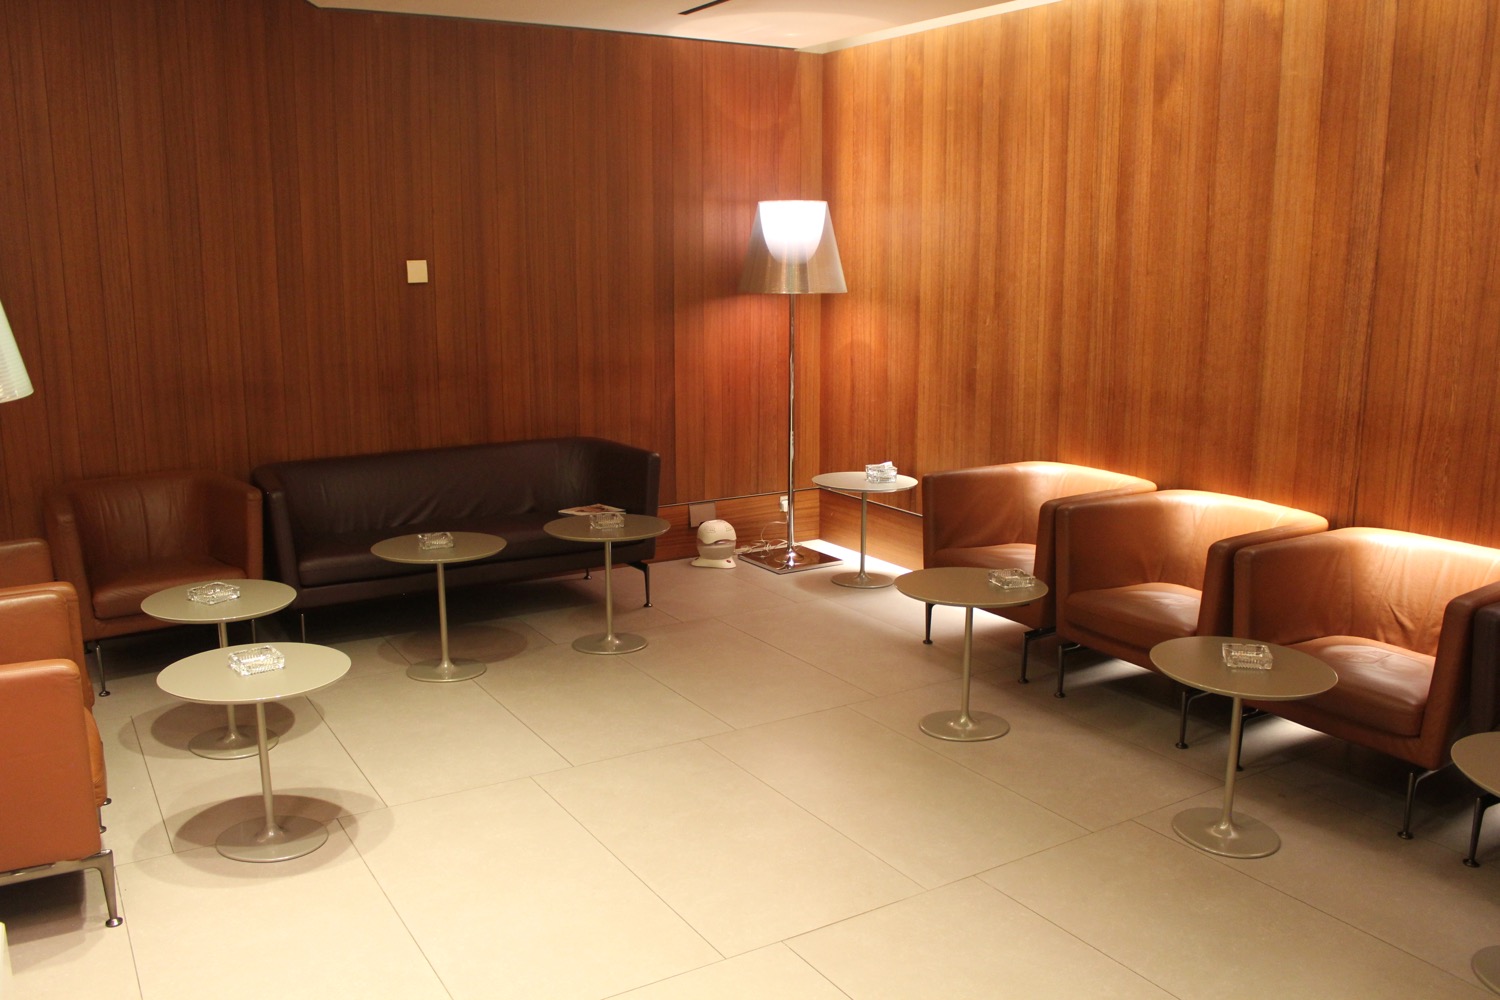 a room with a wood paneled wall and chairs and a lamp